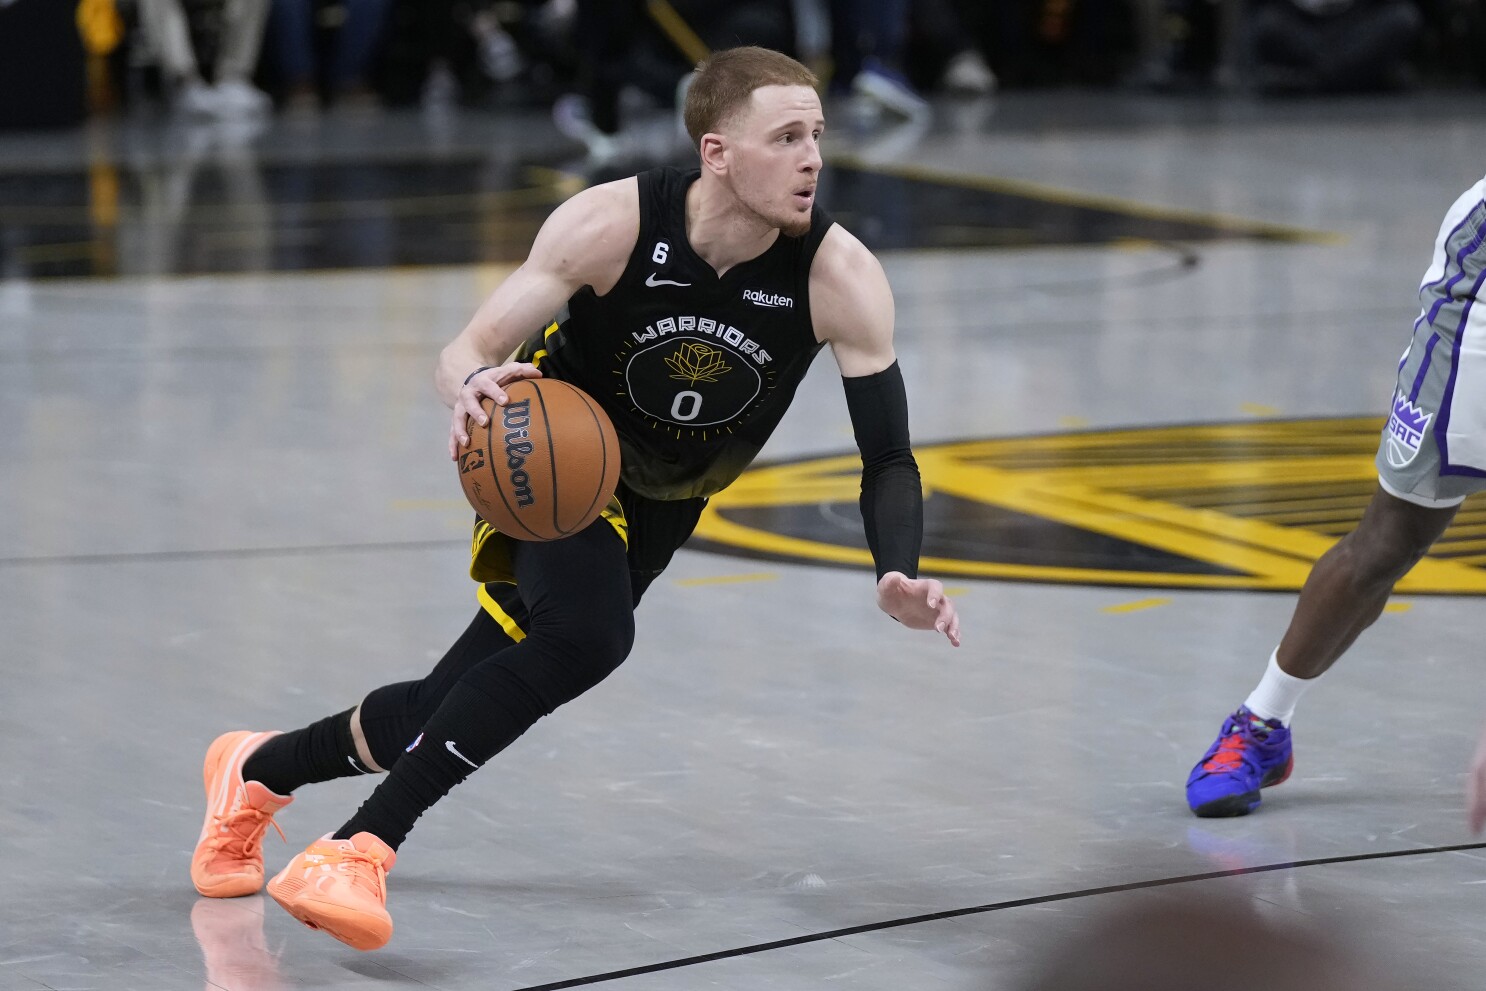 Free-agent guard Donte DiVincenzo leaves Kings for Warriors